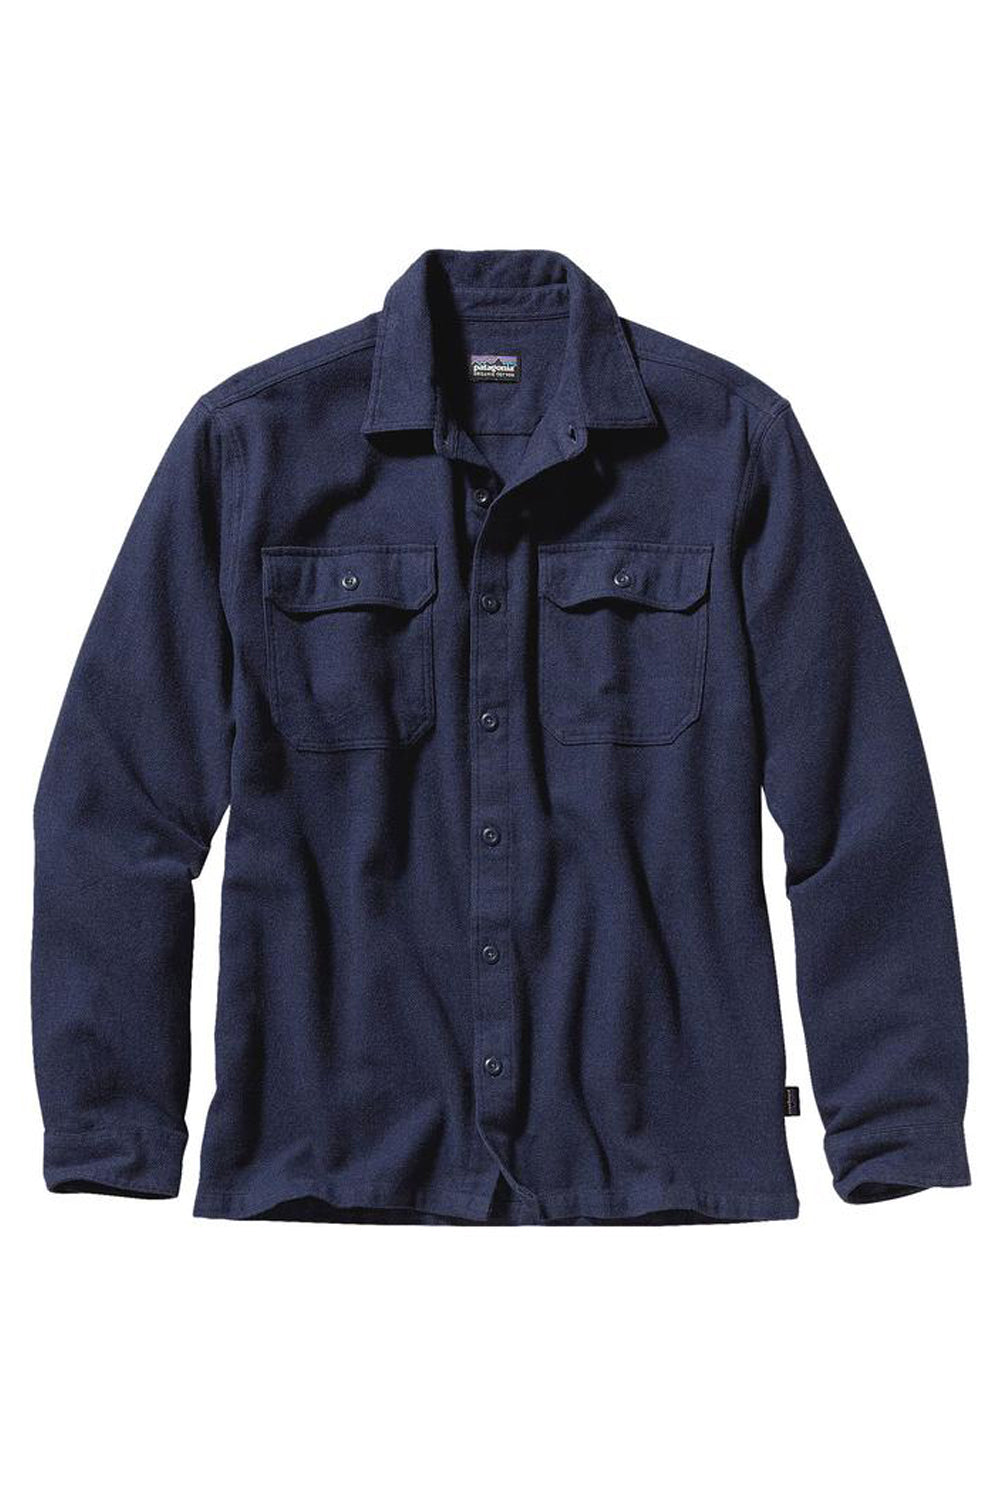 Patagonia Men’s Long Sleeve Fjord Flannel Shirt